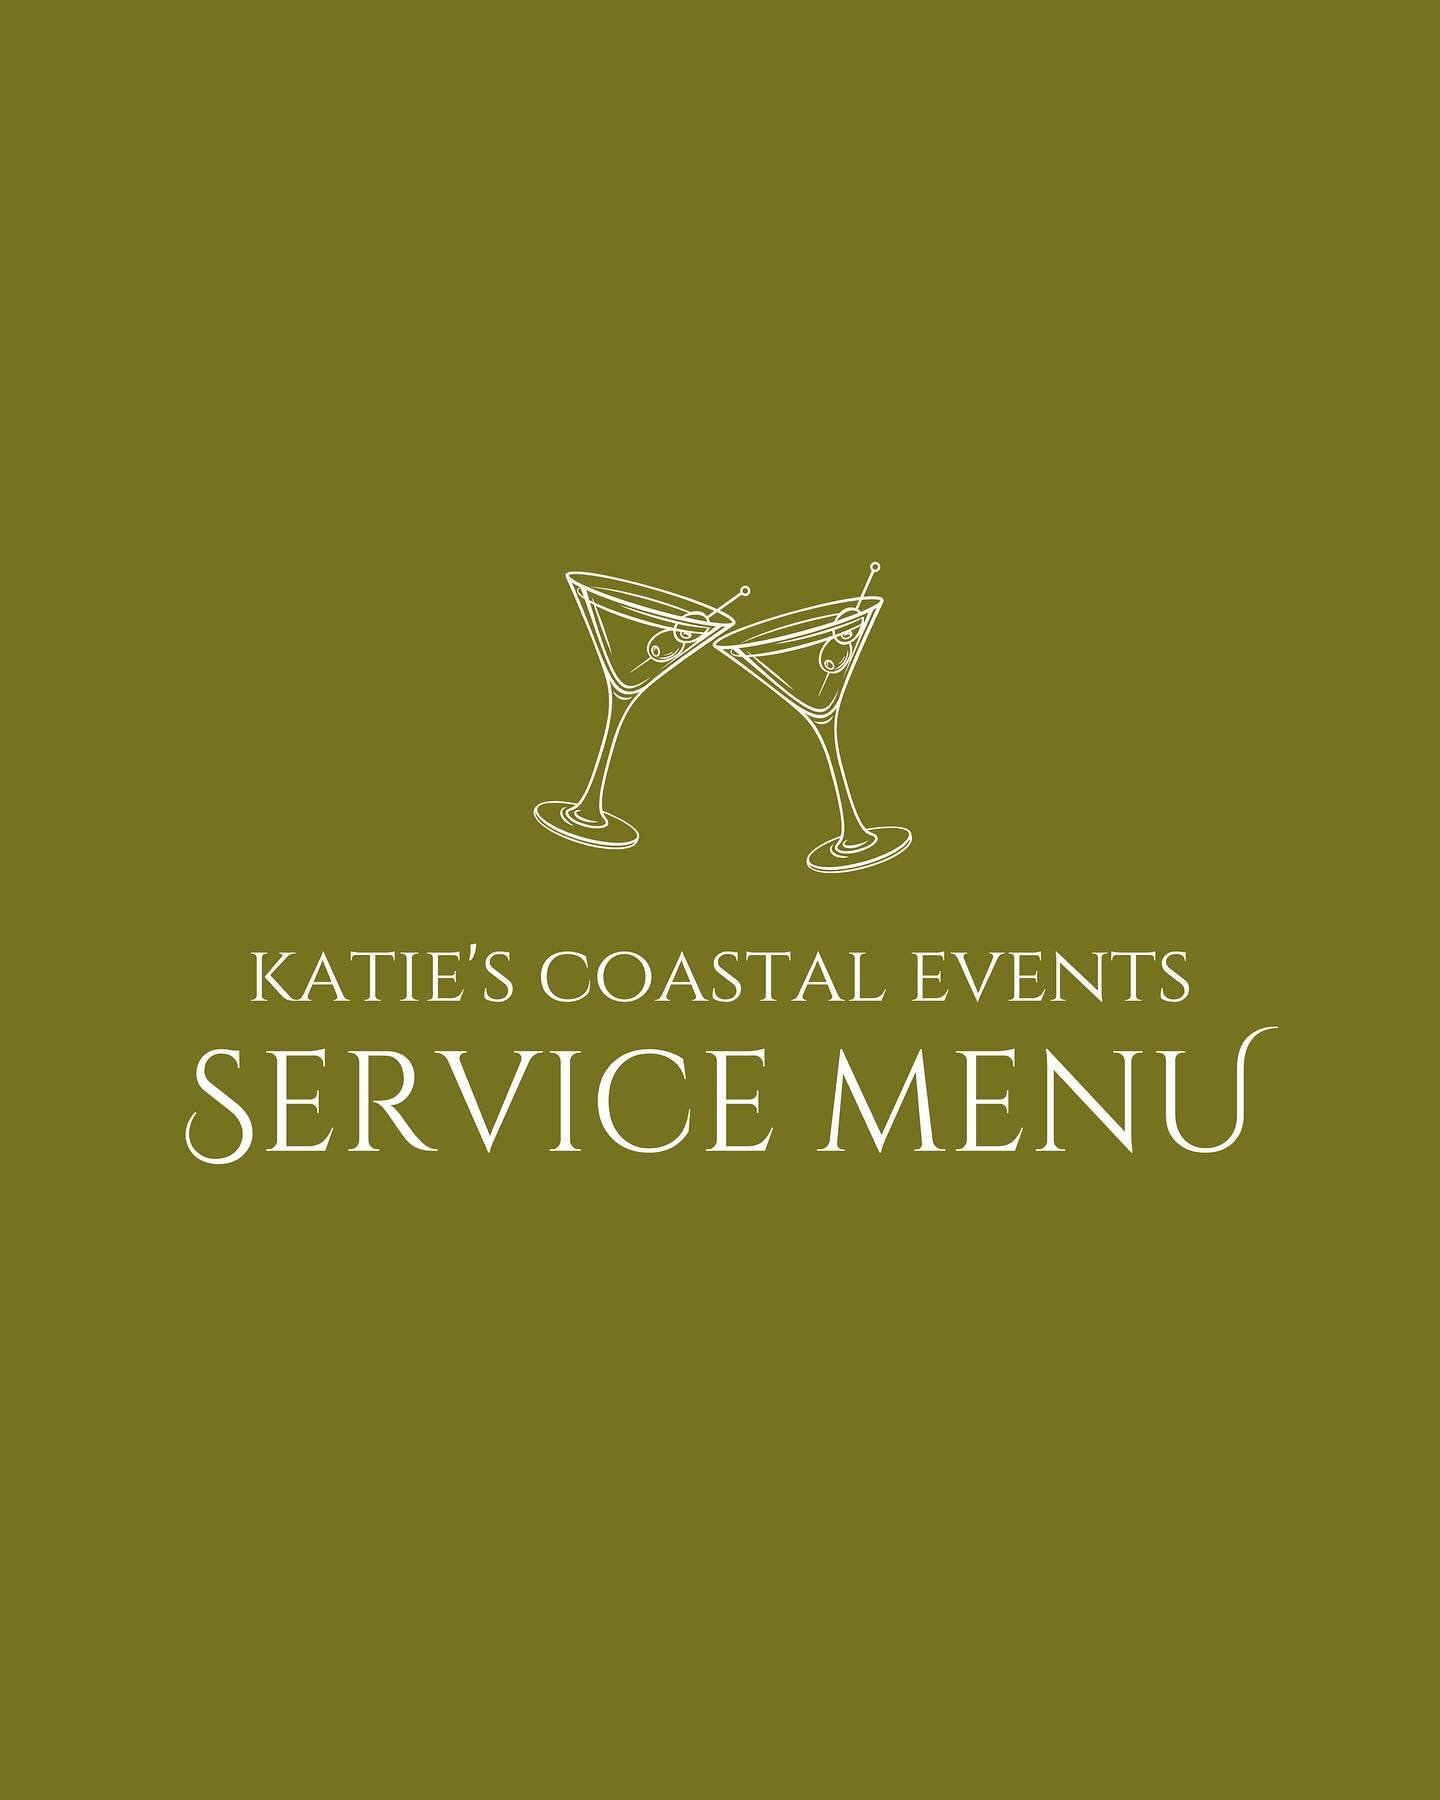 Unwind with a classic dirty martini and let us take care of the rest🍸 Katie&rsquo;s Coastal Events handles the challenges of event curation so you can relax and enjoy the bliss. We&rsquo;re a full-service event planning company, specializing in wedd